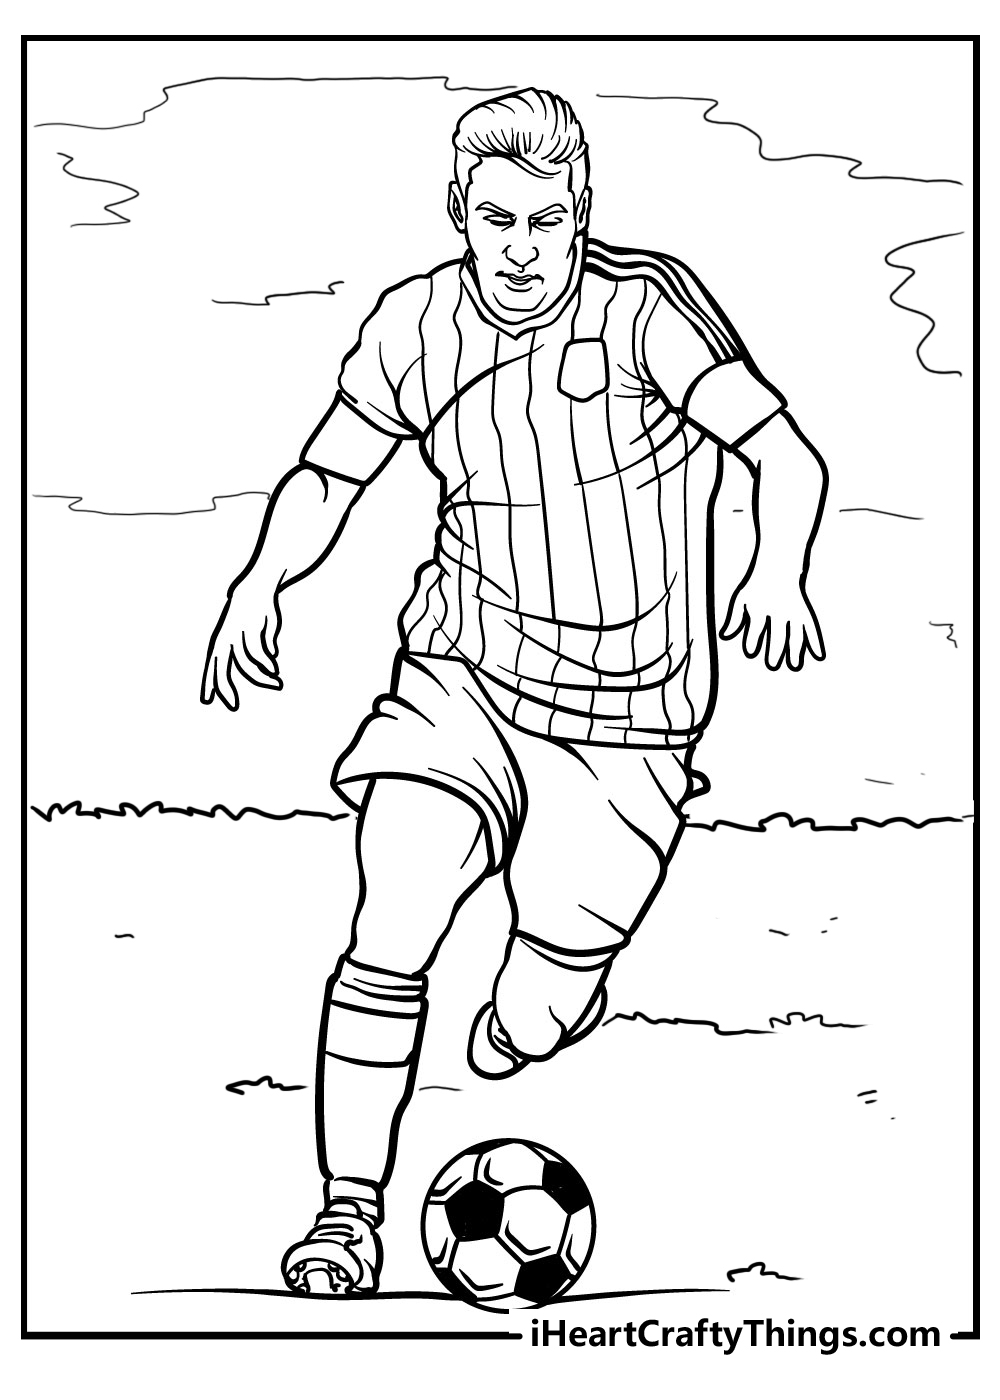 Football coloring pages free printables